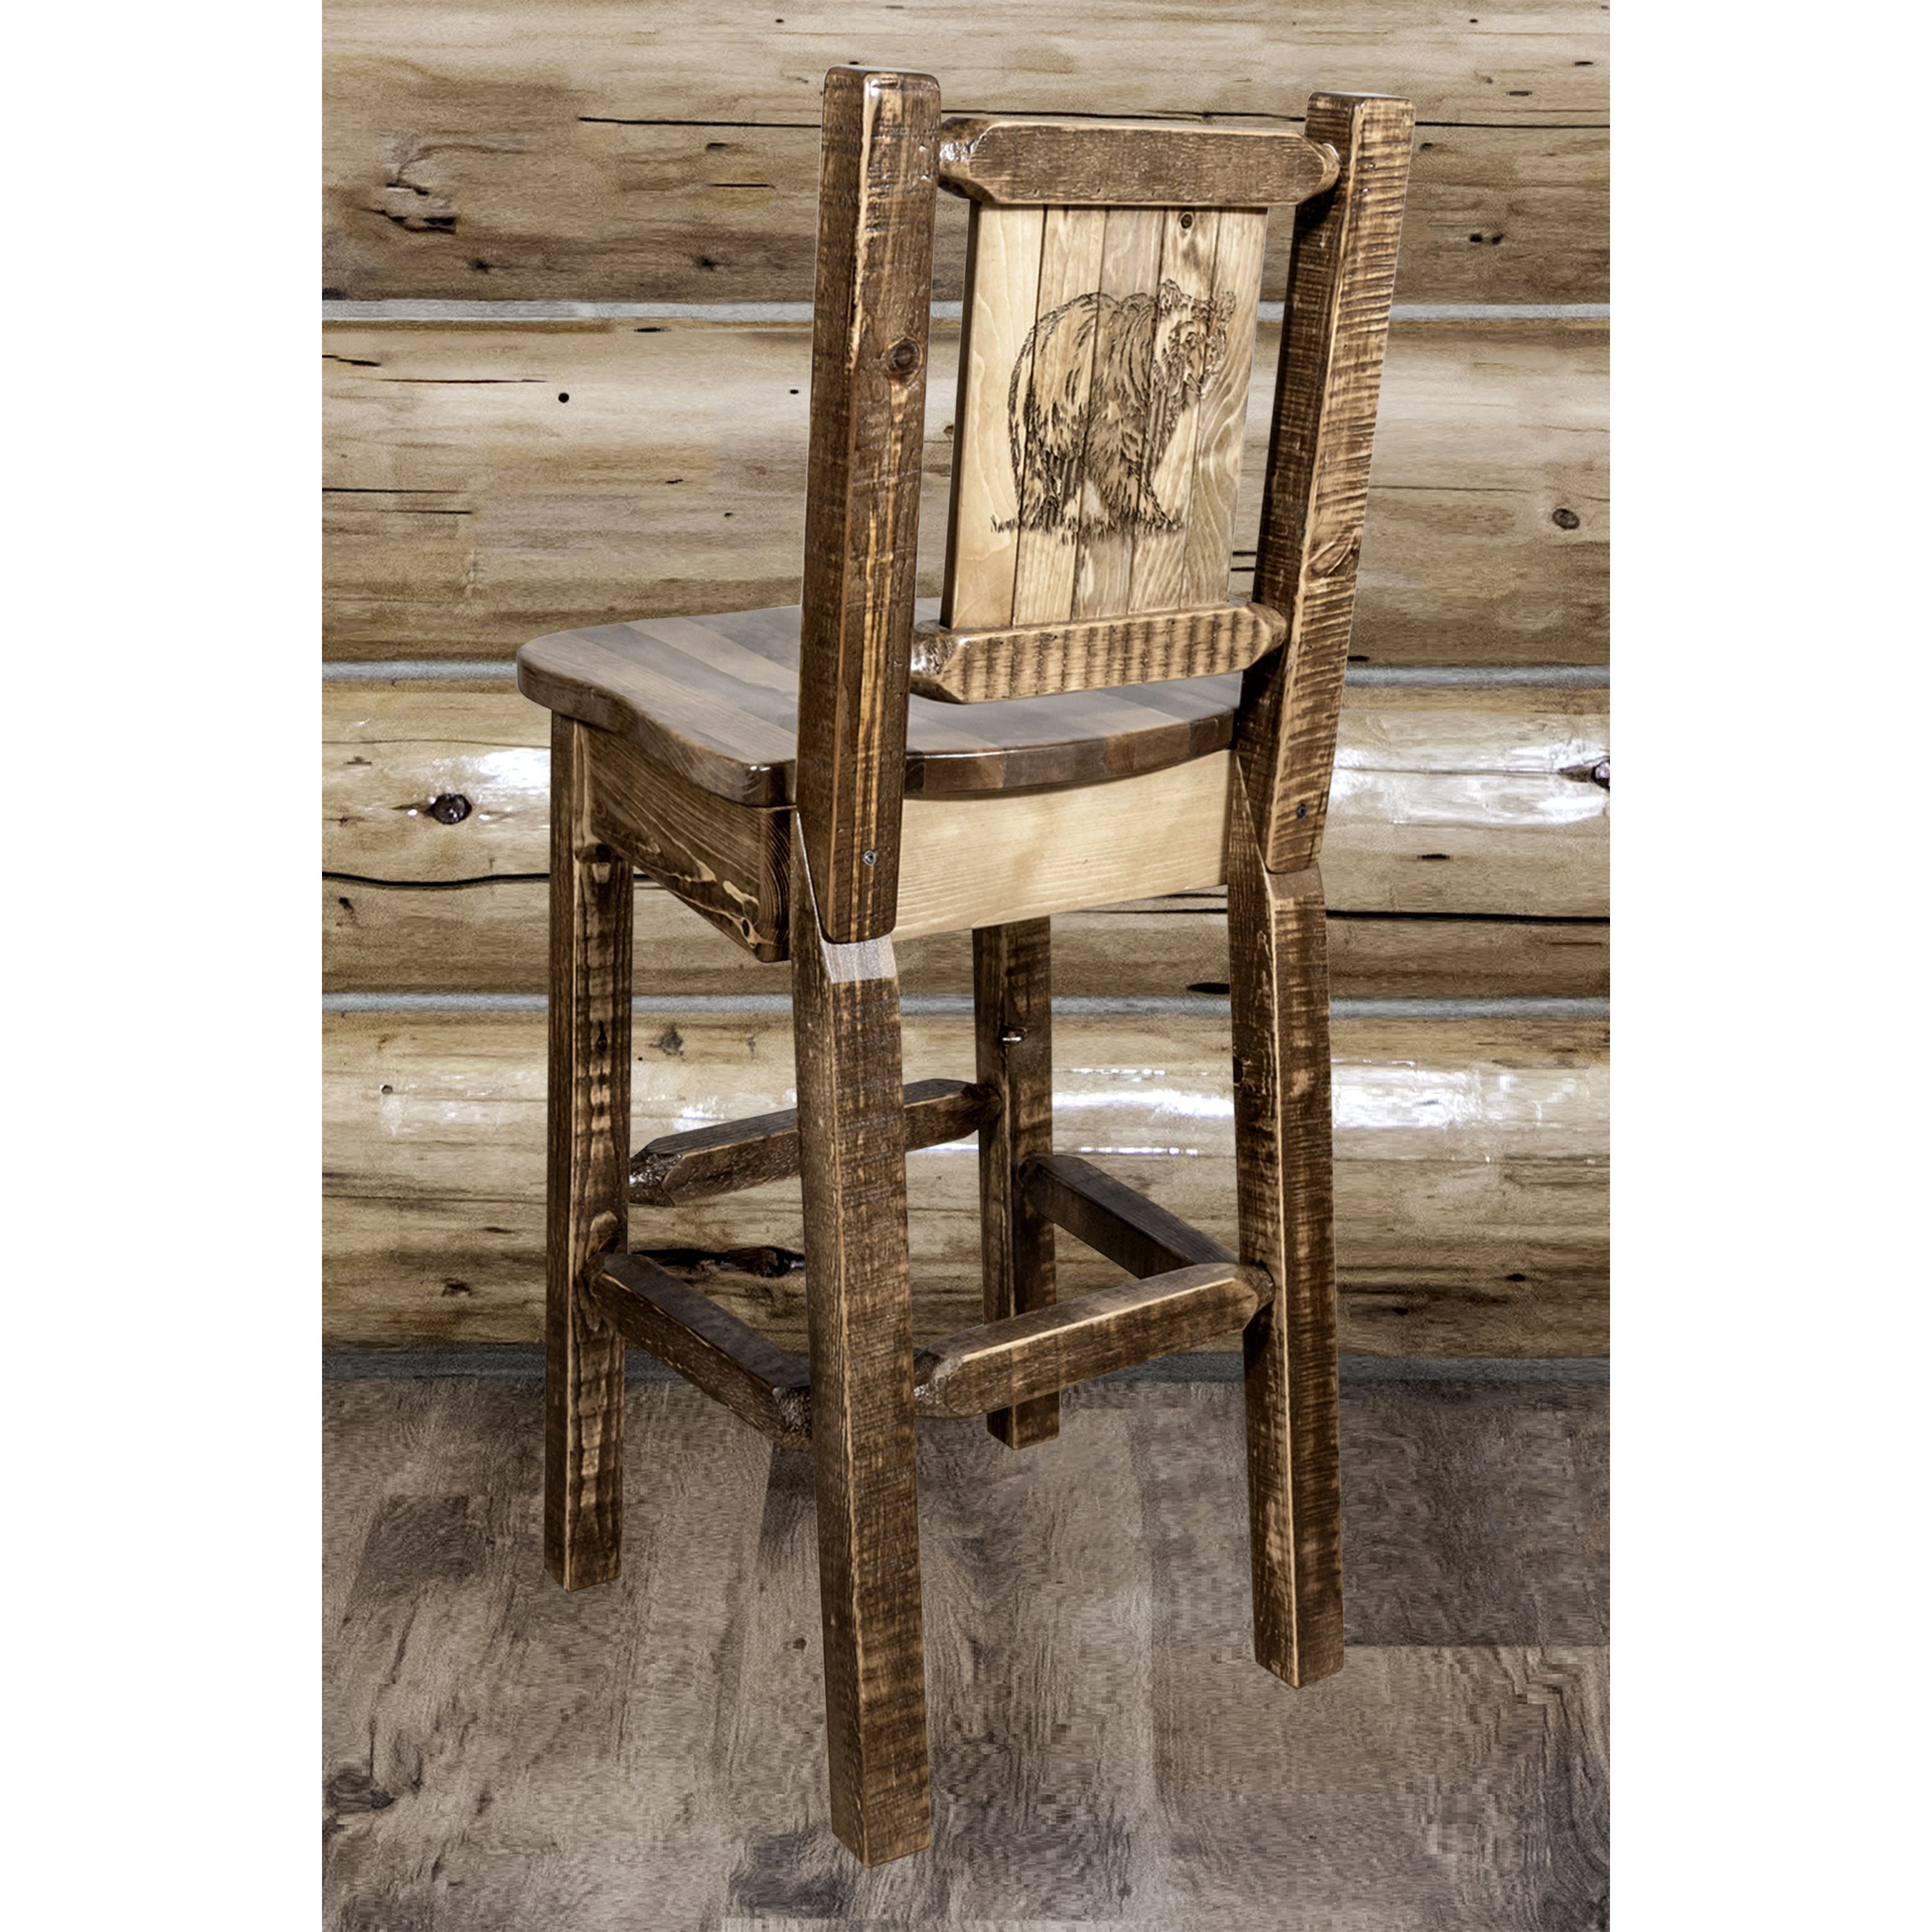 Montana Homestead MWHCBSWNRSLLZBEAR Barstool With Back and Laser Engraved Bear Design Stain Lacquer Finish